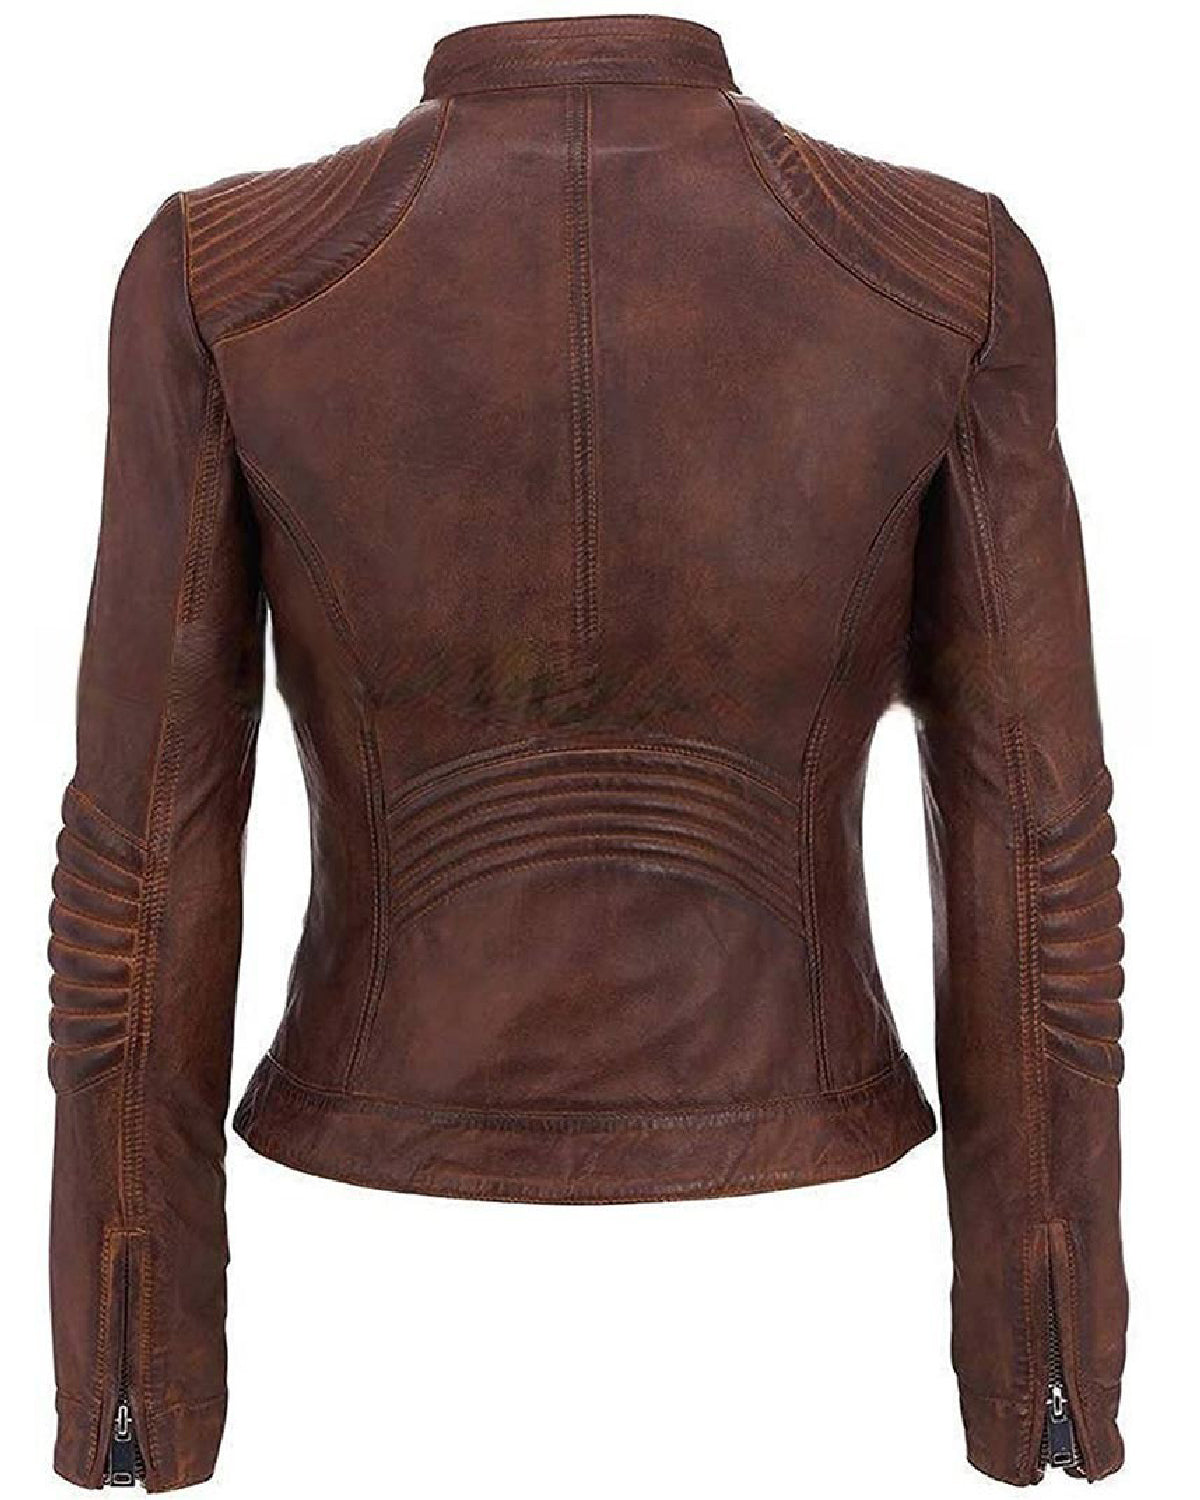 MotorCycleJackets Women’s Brown Cafe Racer Leather Jacket